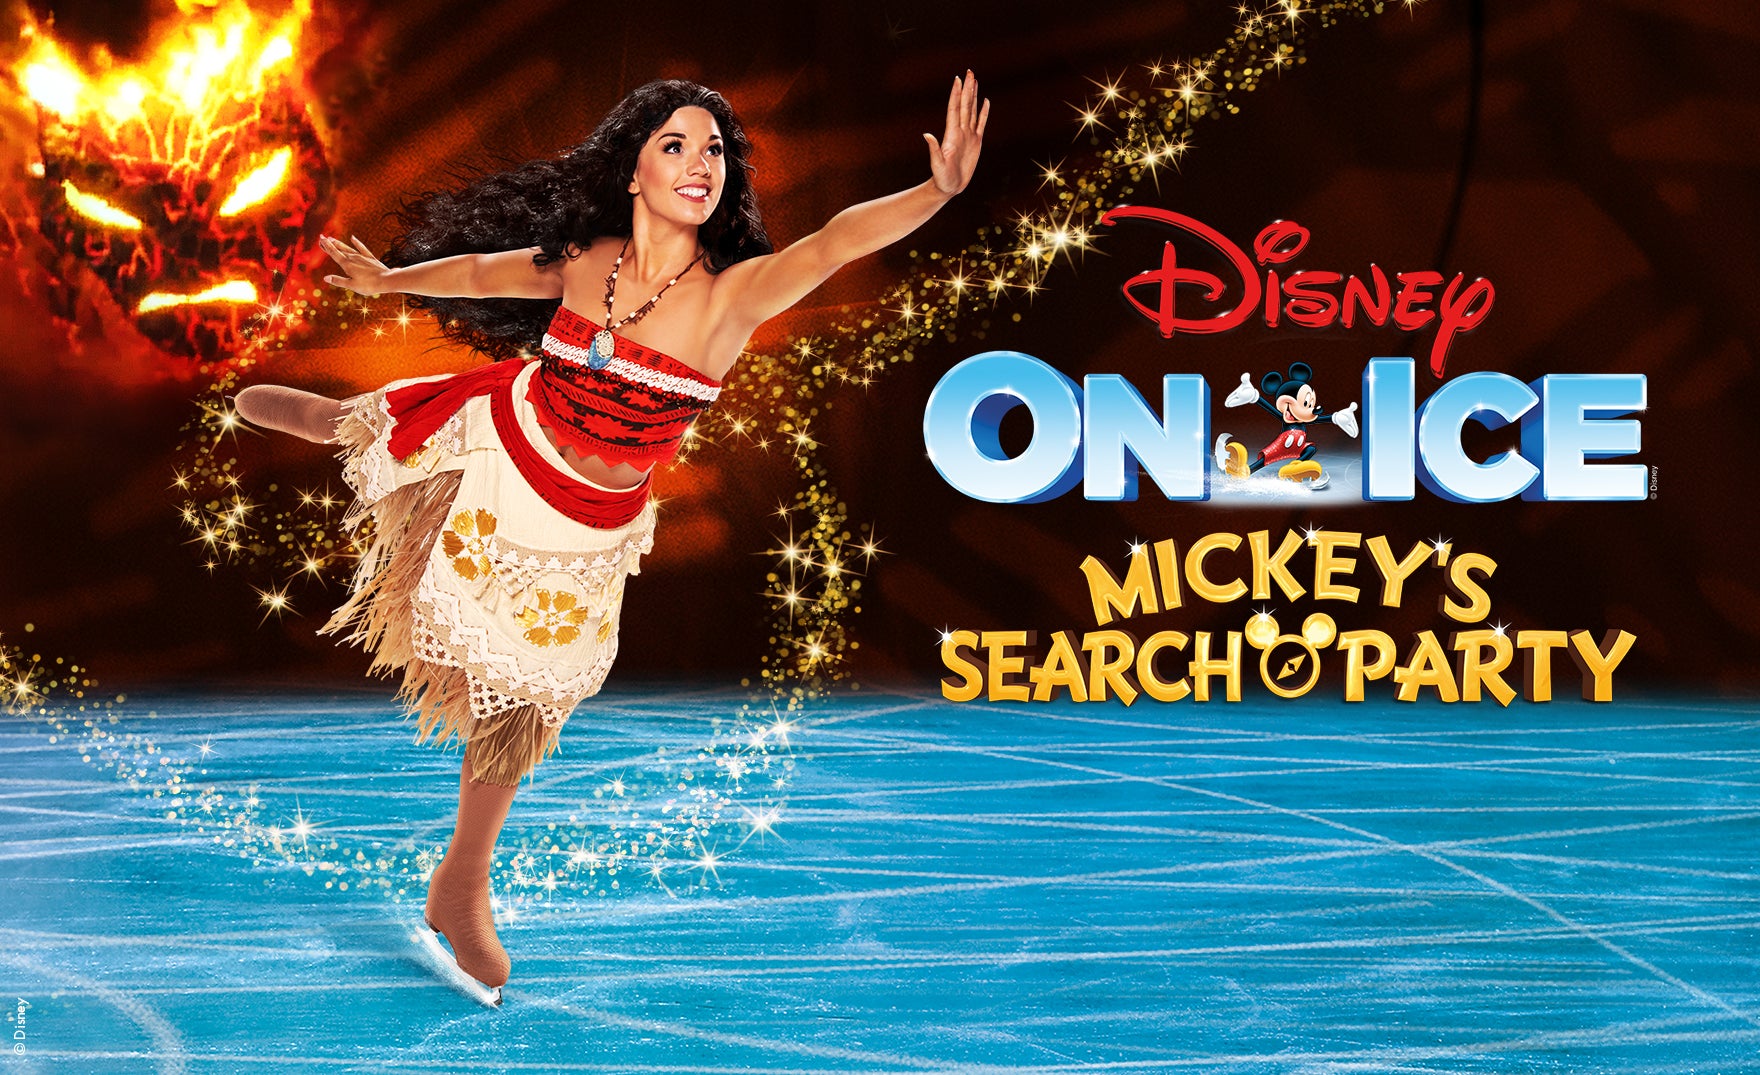 Disney on Ice: Mickey's Search Party 